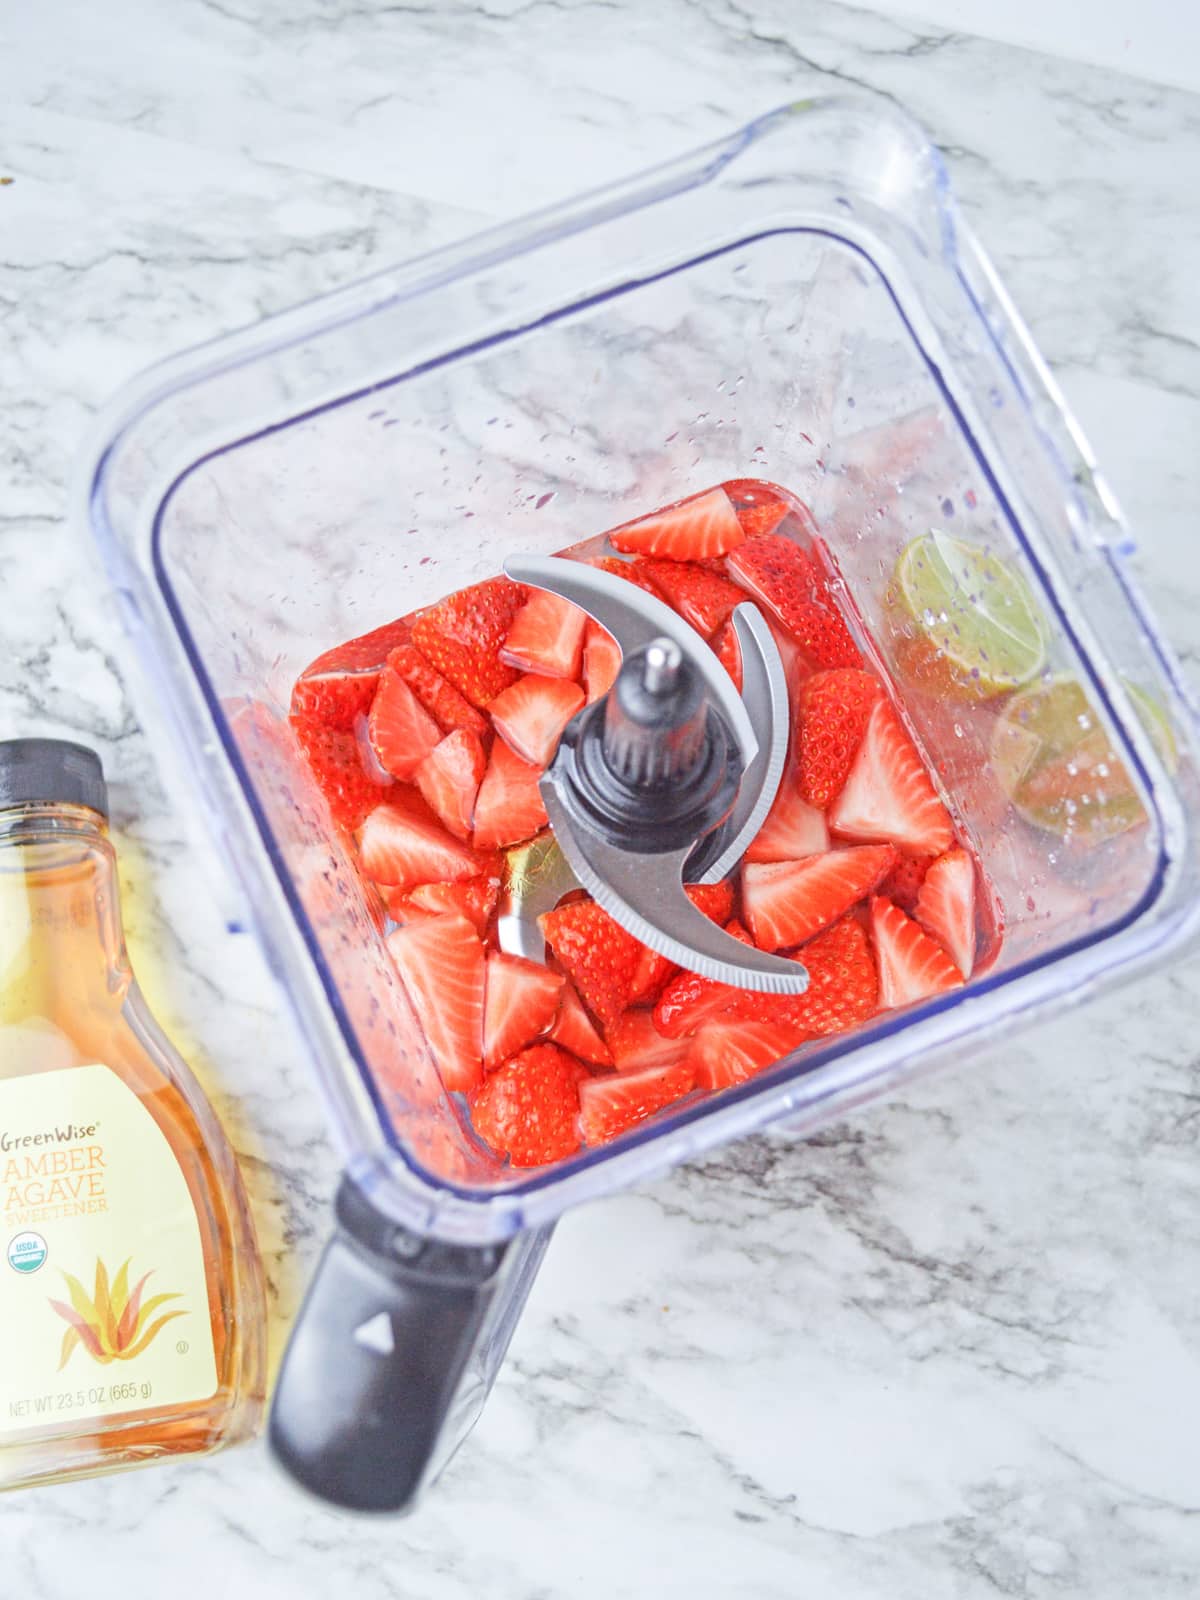 place chopped strawberries with water and sweetener in a blender